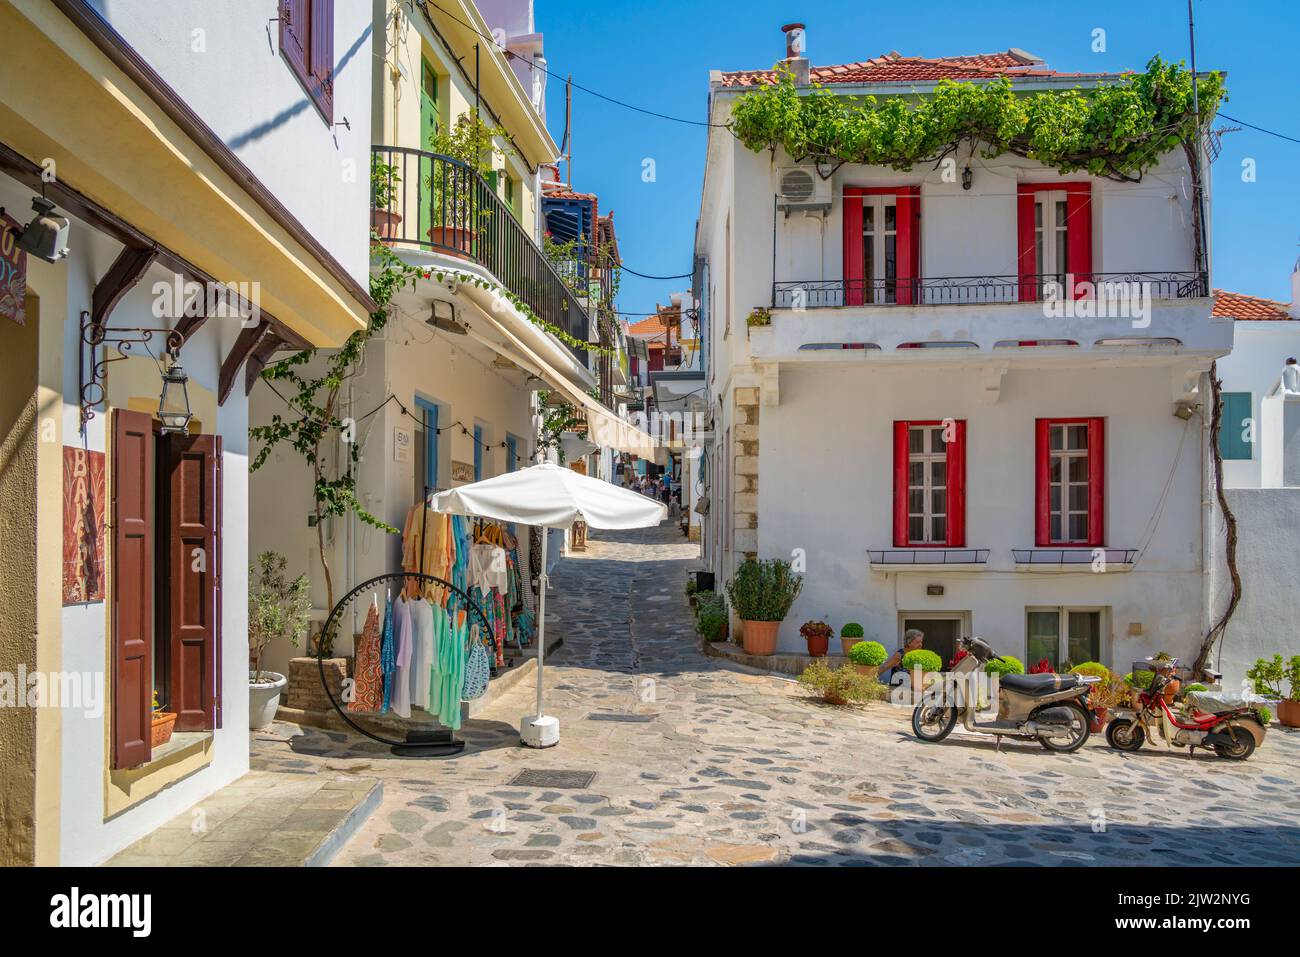 View of shops in narrow street, Skopelos Town, Skopelos Island, Sporades Islands, Greek Islands, Greece, Europe Stock Photo